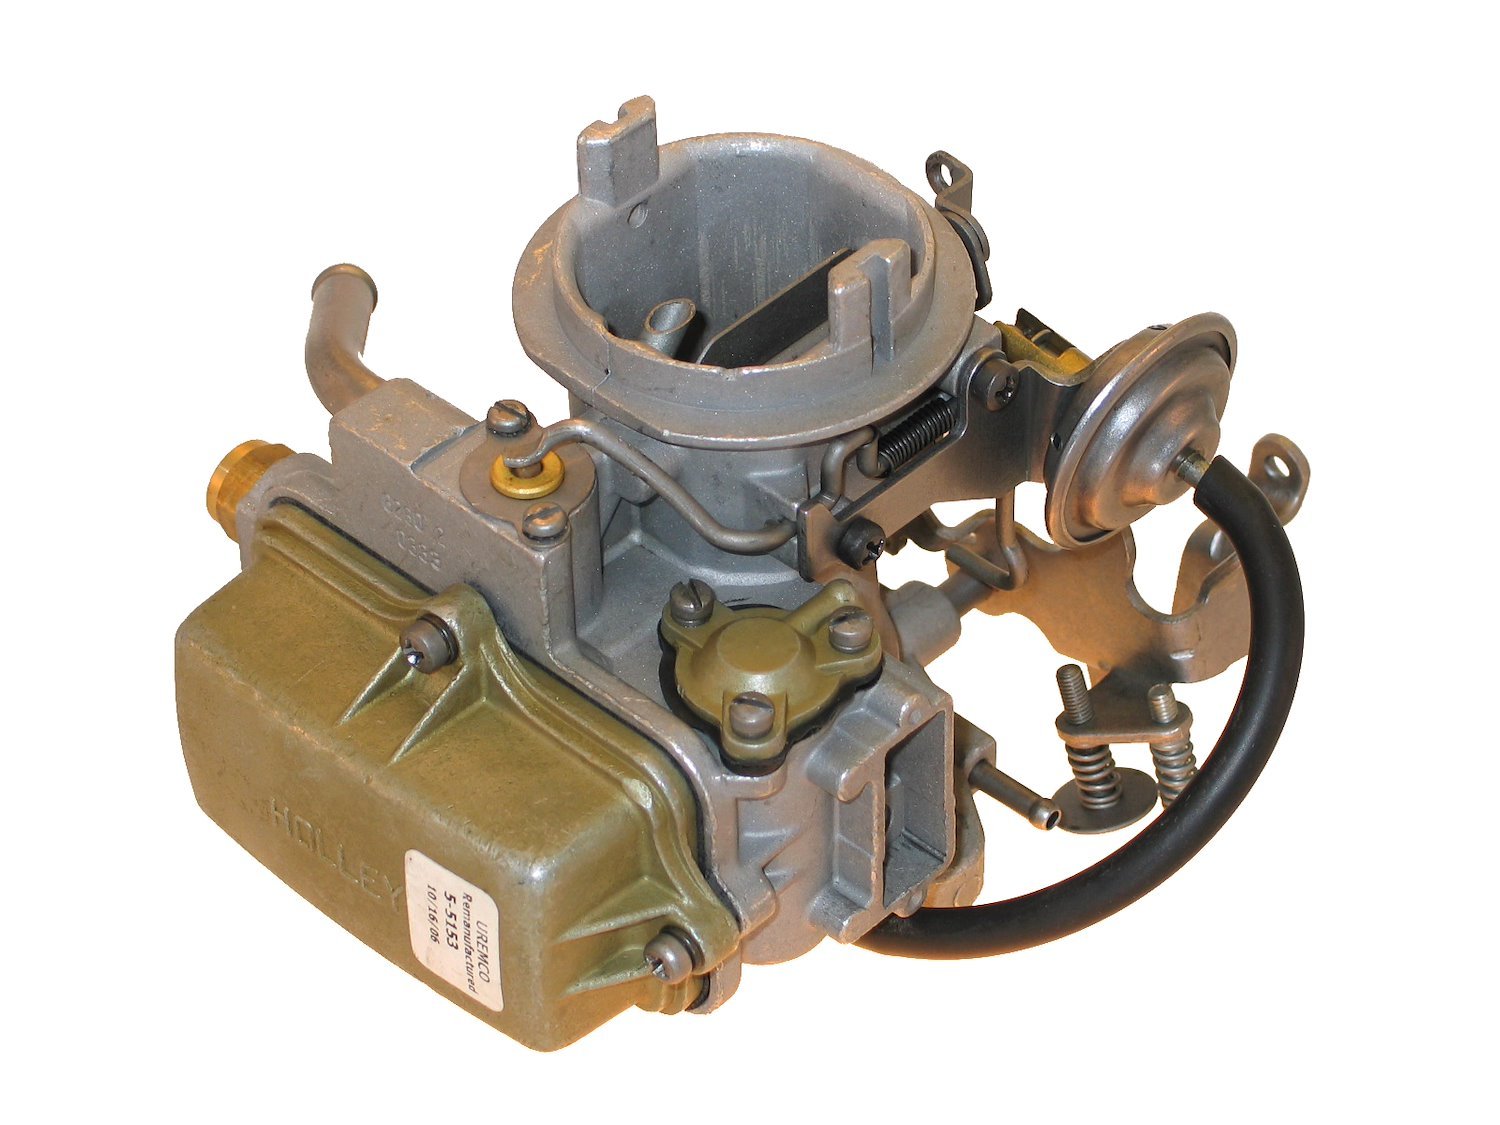 6-697 Holley Remanufactured Carburetor, 1920, w/o A/C-Style